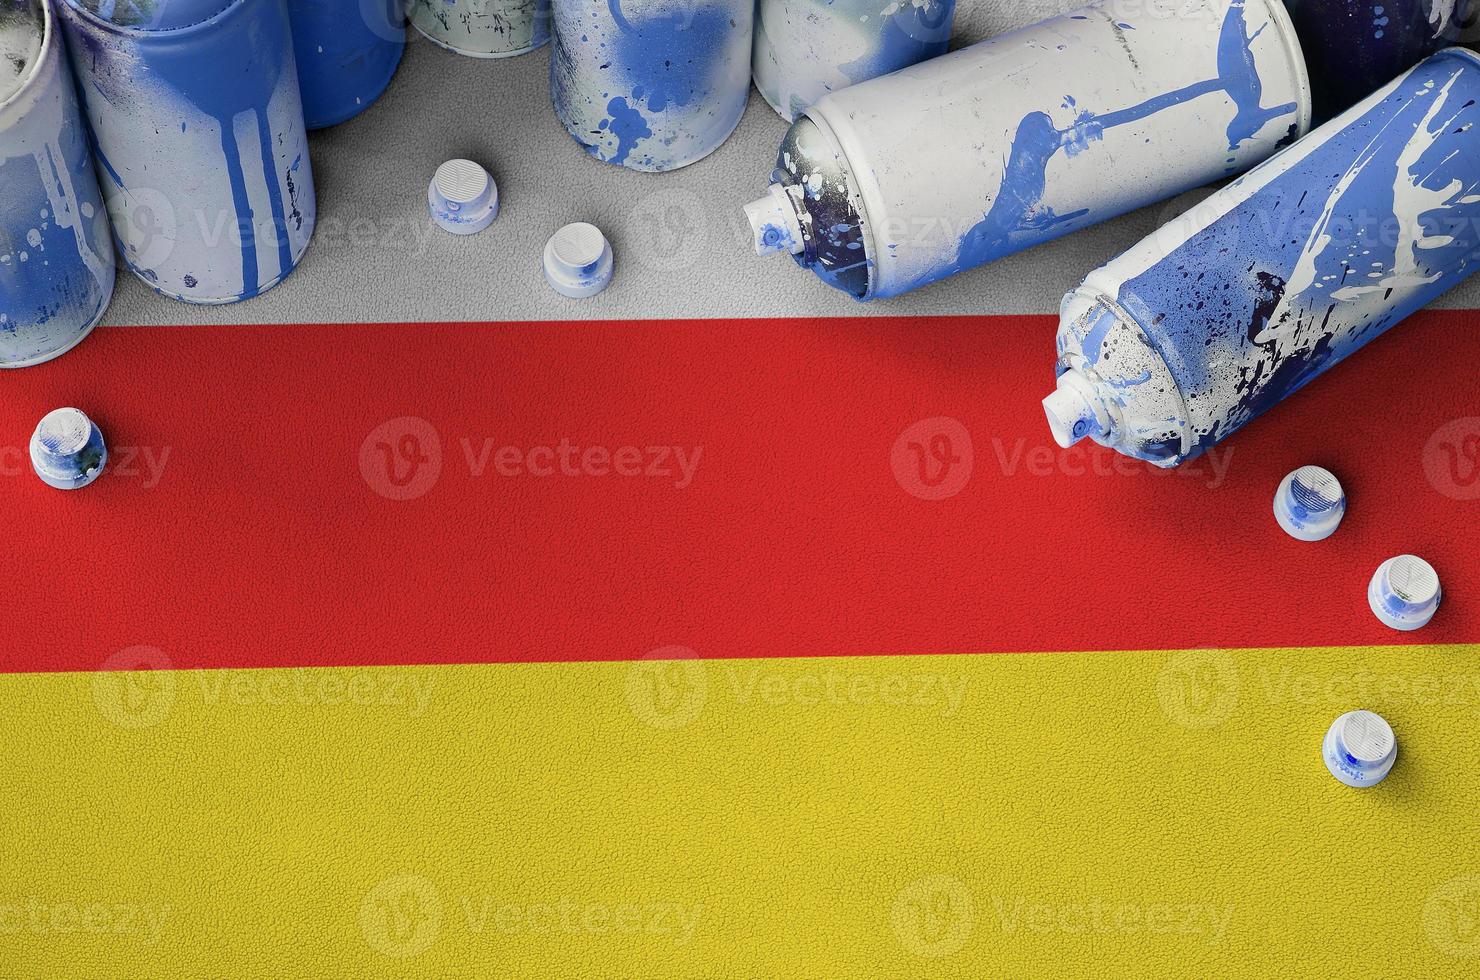 South Ossetia flag and few used aerosol spray cans for graffiti painting. Street art culture concept photo